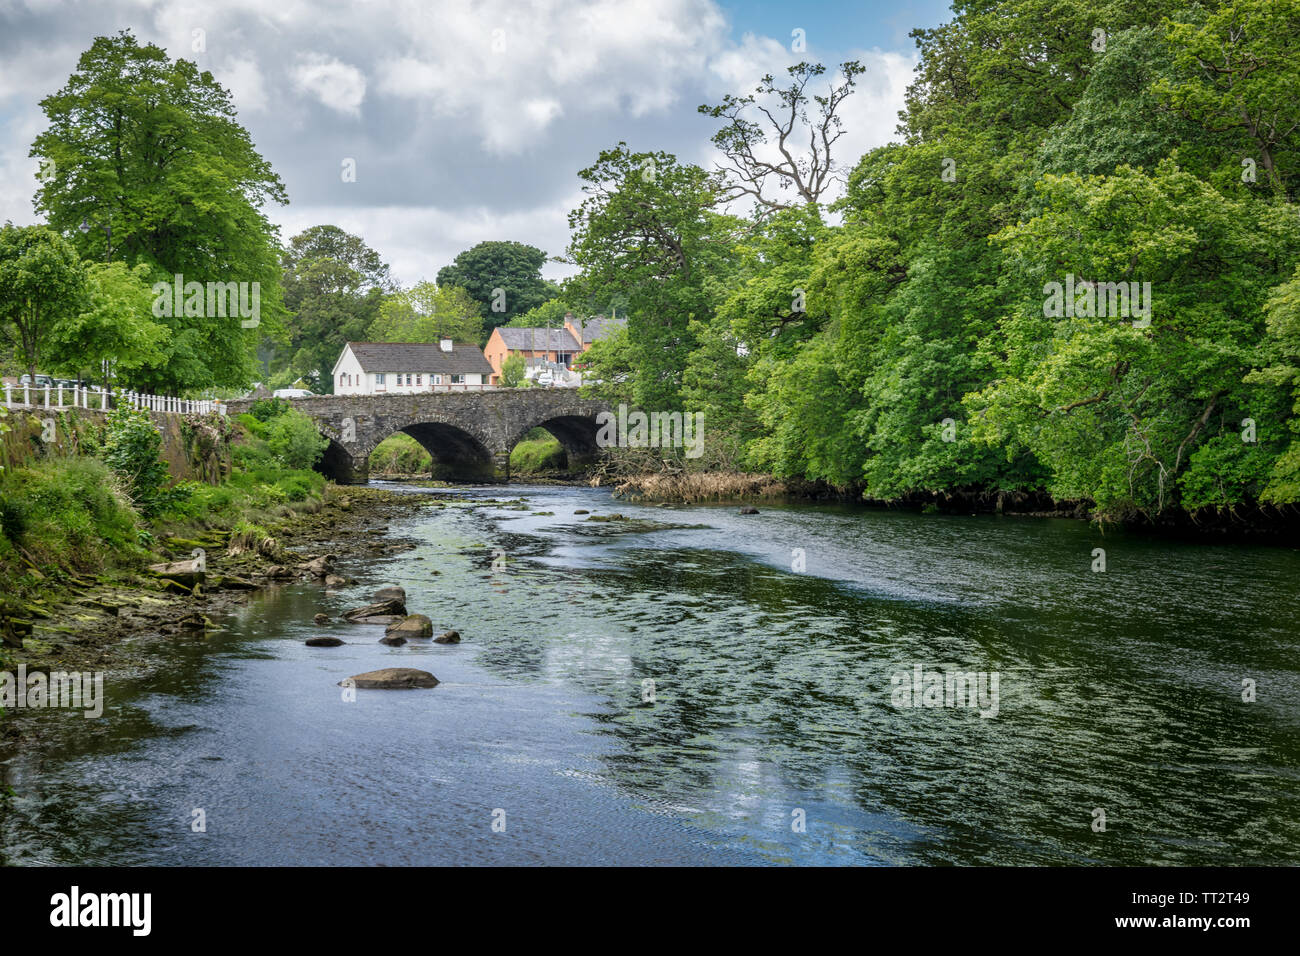 Old stone bridge over a river in the village or Ramelton in Donegal Ireland Stock Photo